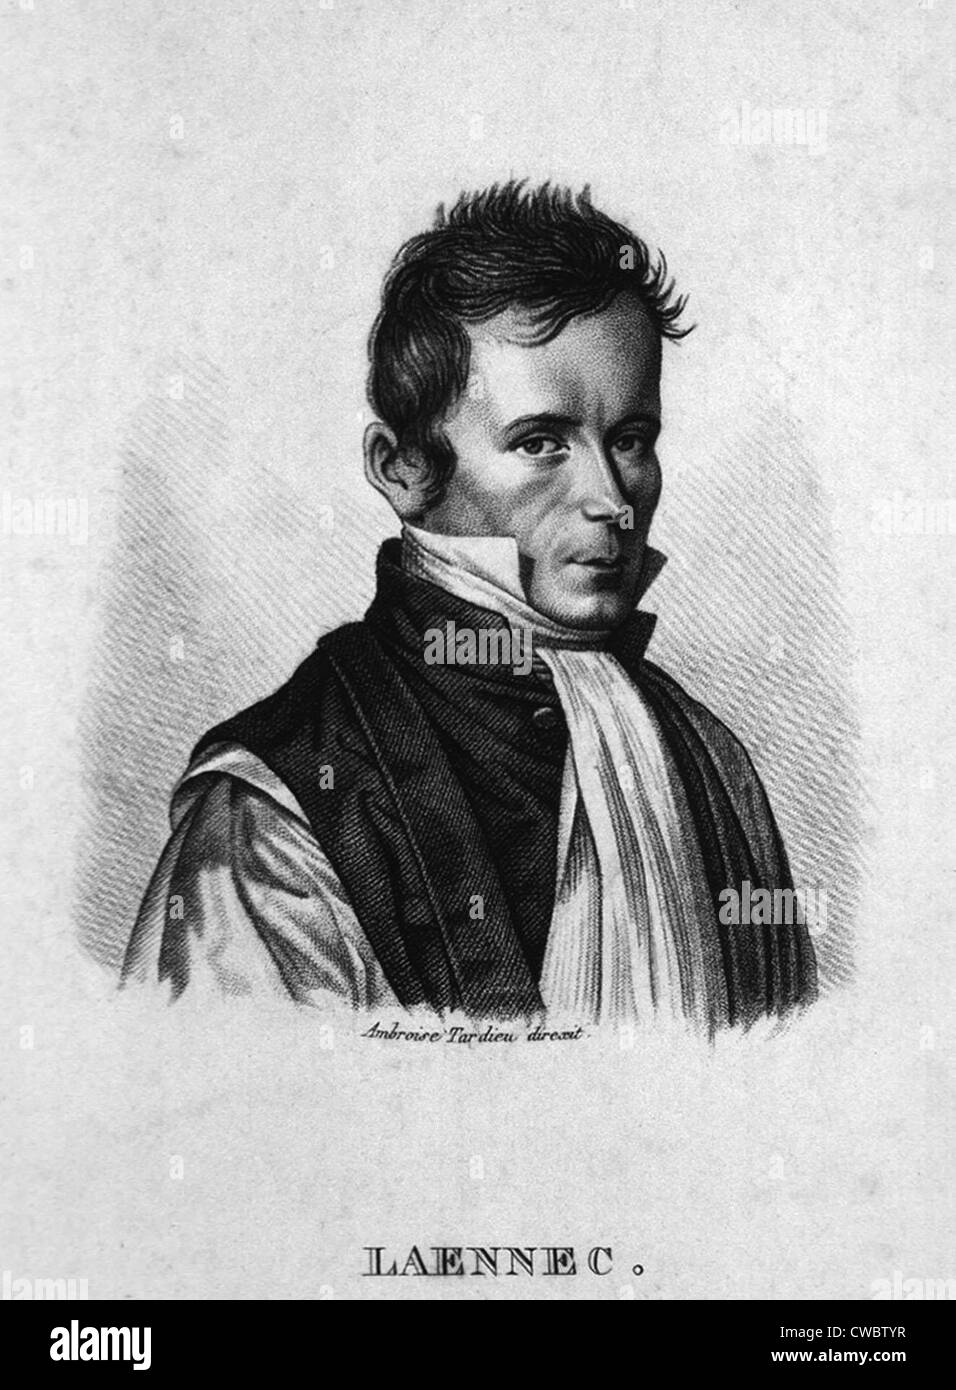 Rene Laennec (1781-1826), French physician and inventor of the stethoscope. He developed methods of medical diagnosis from Stock Photo